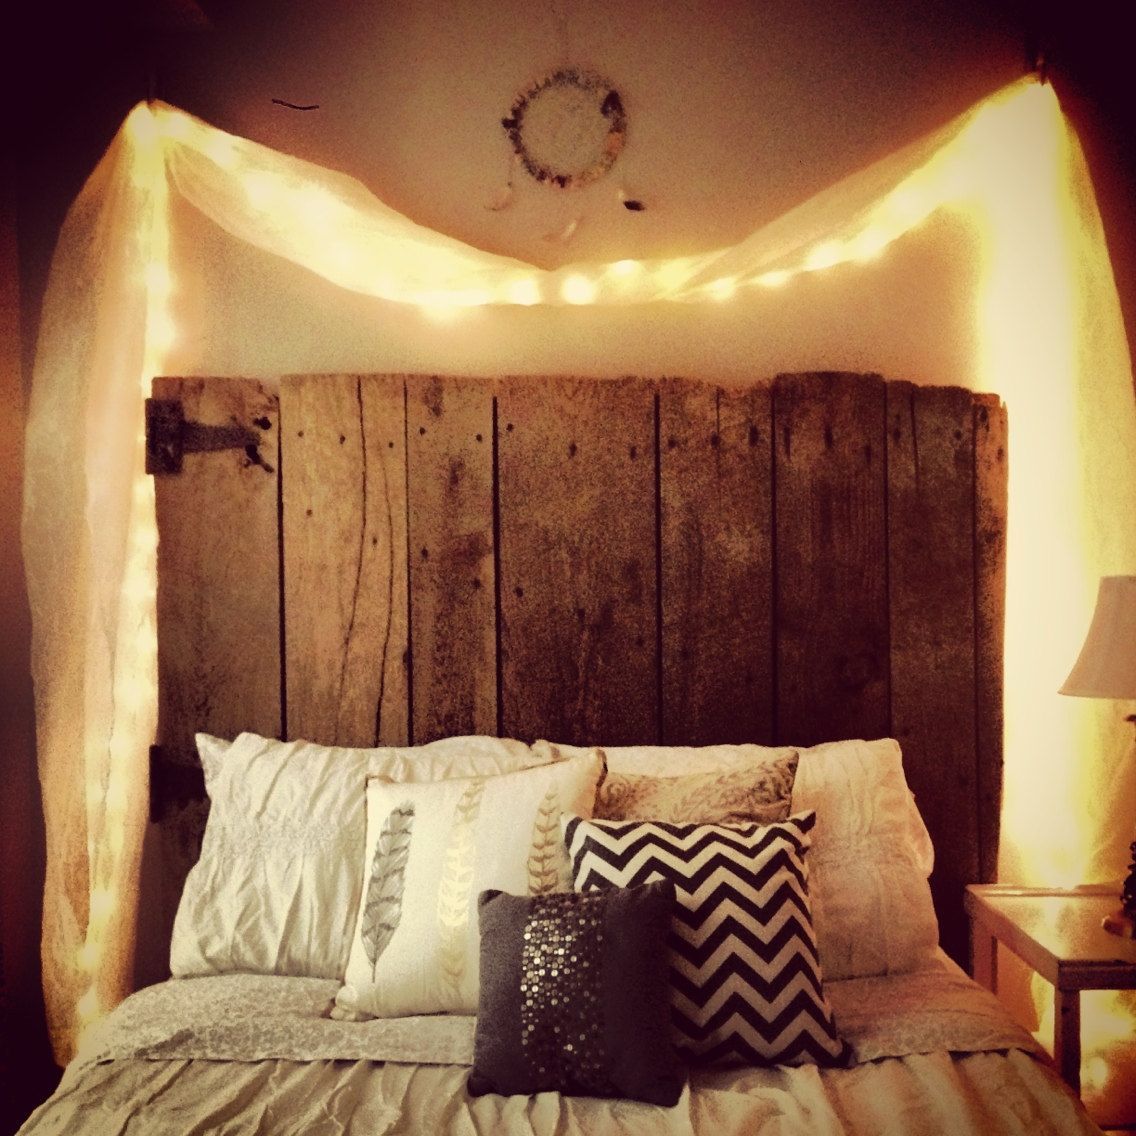 Reclaimed timber gate as headboard. Gorgeous lights and cushions. Such a dreamy room. I want to sleep here!